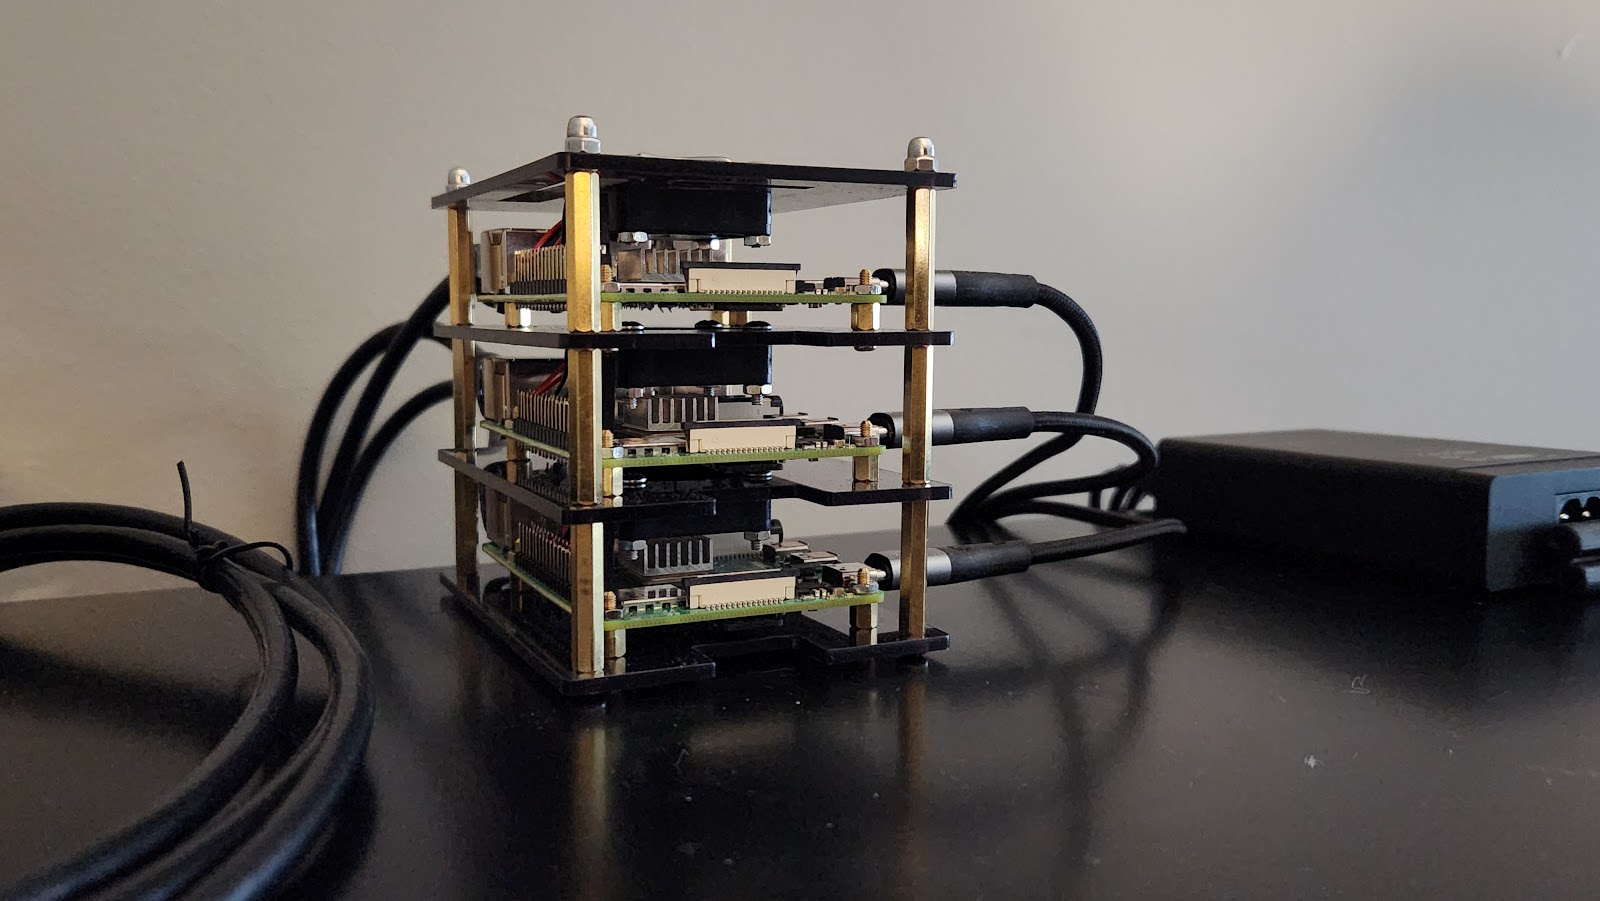 Kubernetes cluster built from three Raspberry Pi 4 single board computers